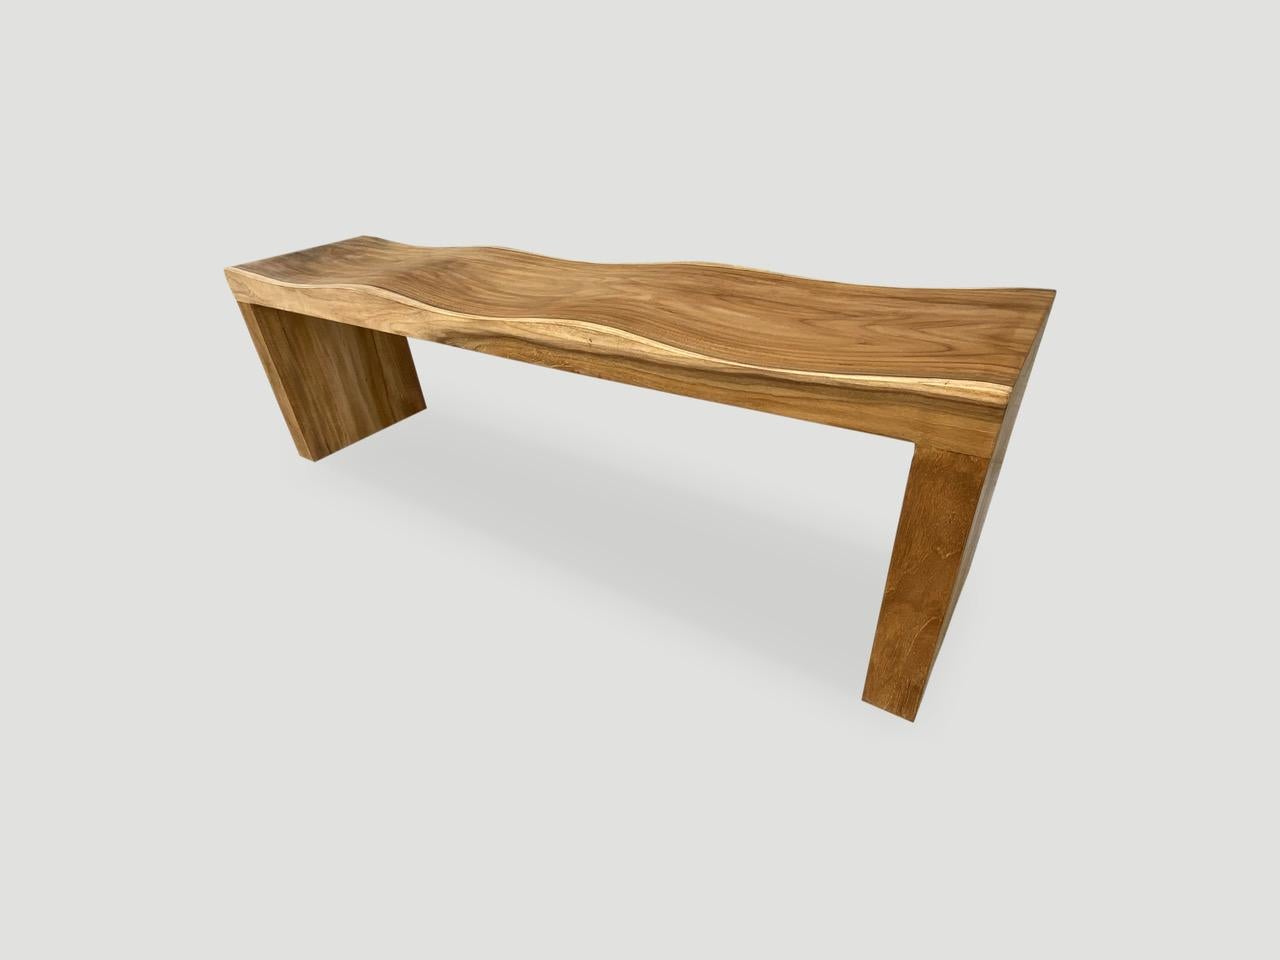 Andrianna Shamaris Natural Reclaimed Teak Wood Wave Bench In Excellent Condition For Sale In New York, NY